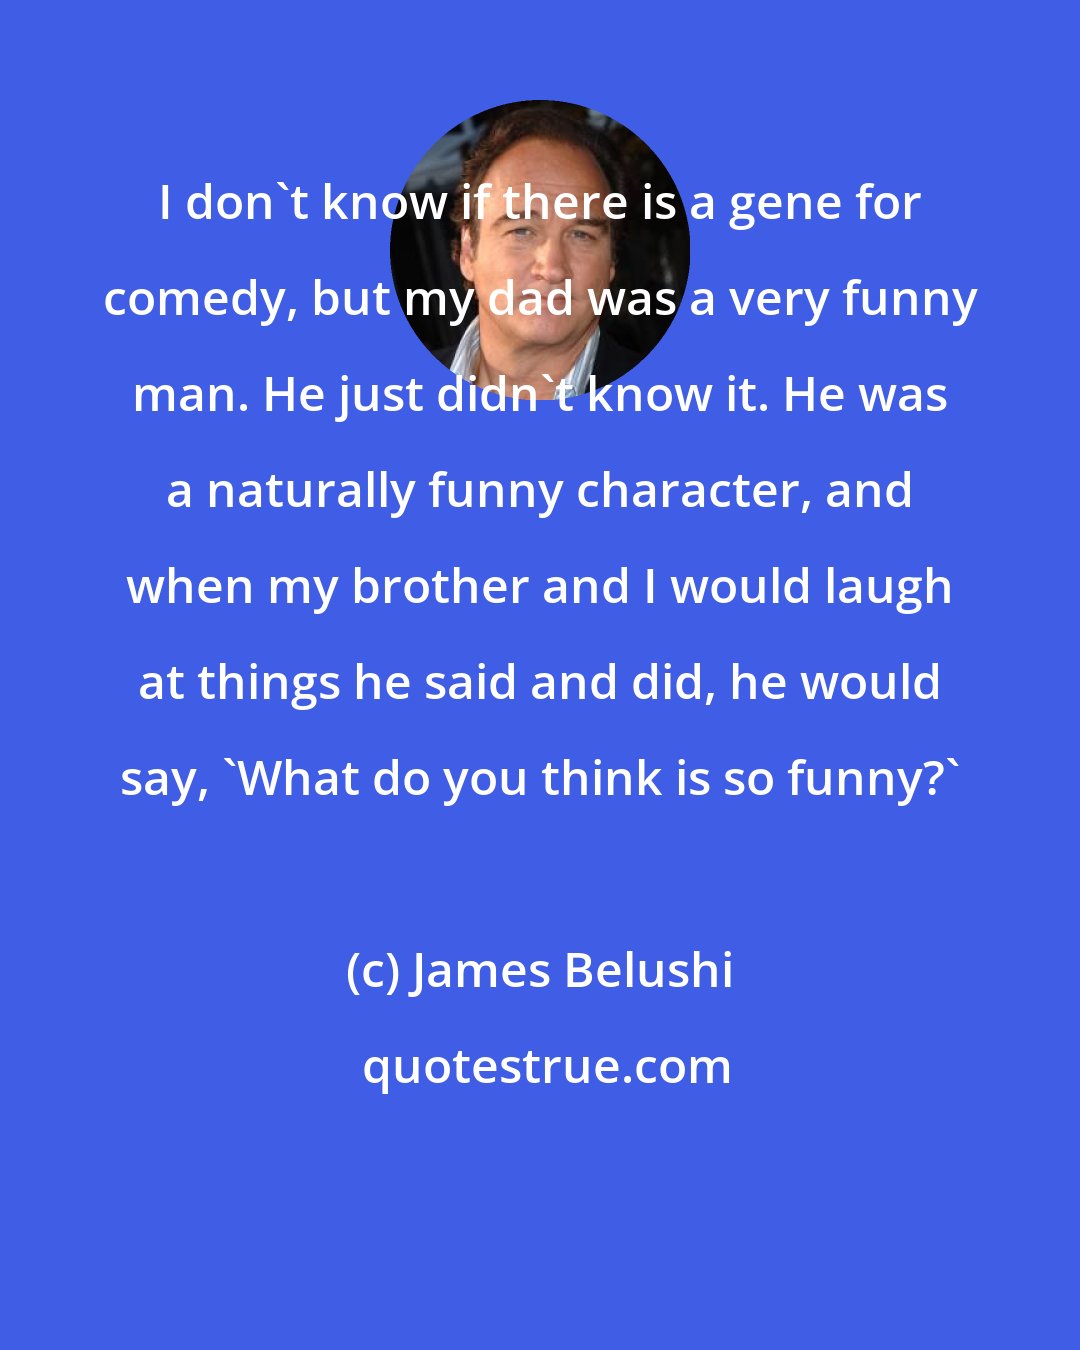 James Belushi: I don't know if there is a gene for comedy, but my dad was a very funny man. He just didn't know it. He was a naturally funny character, and when my brother and I would laugh at things he said and did, he would say, 'What do you think is so funny?'